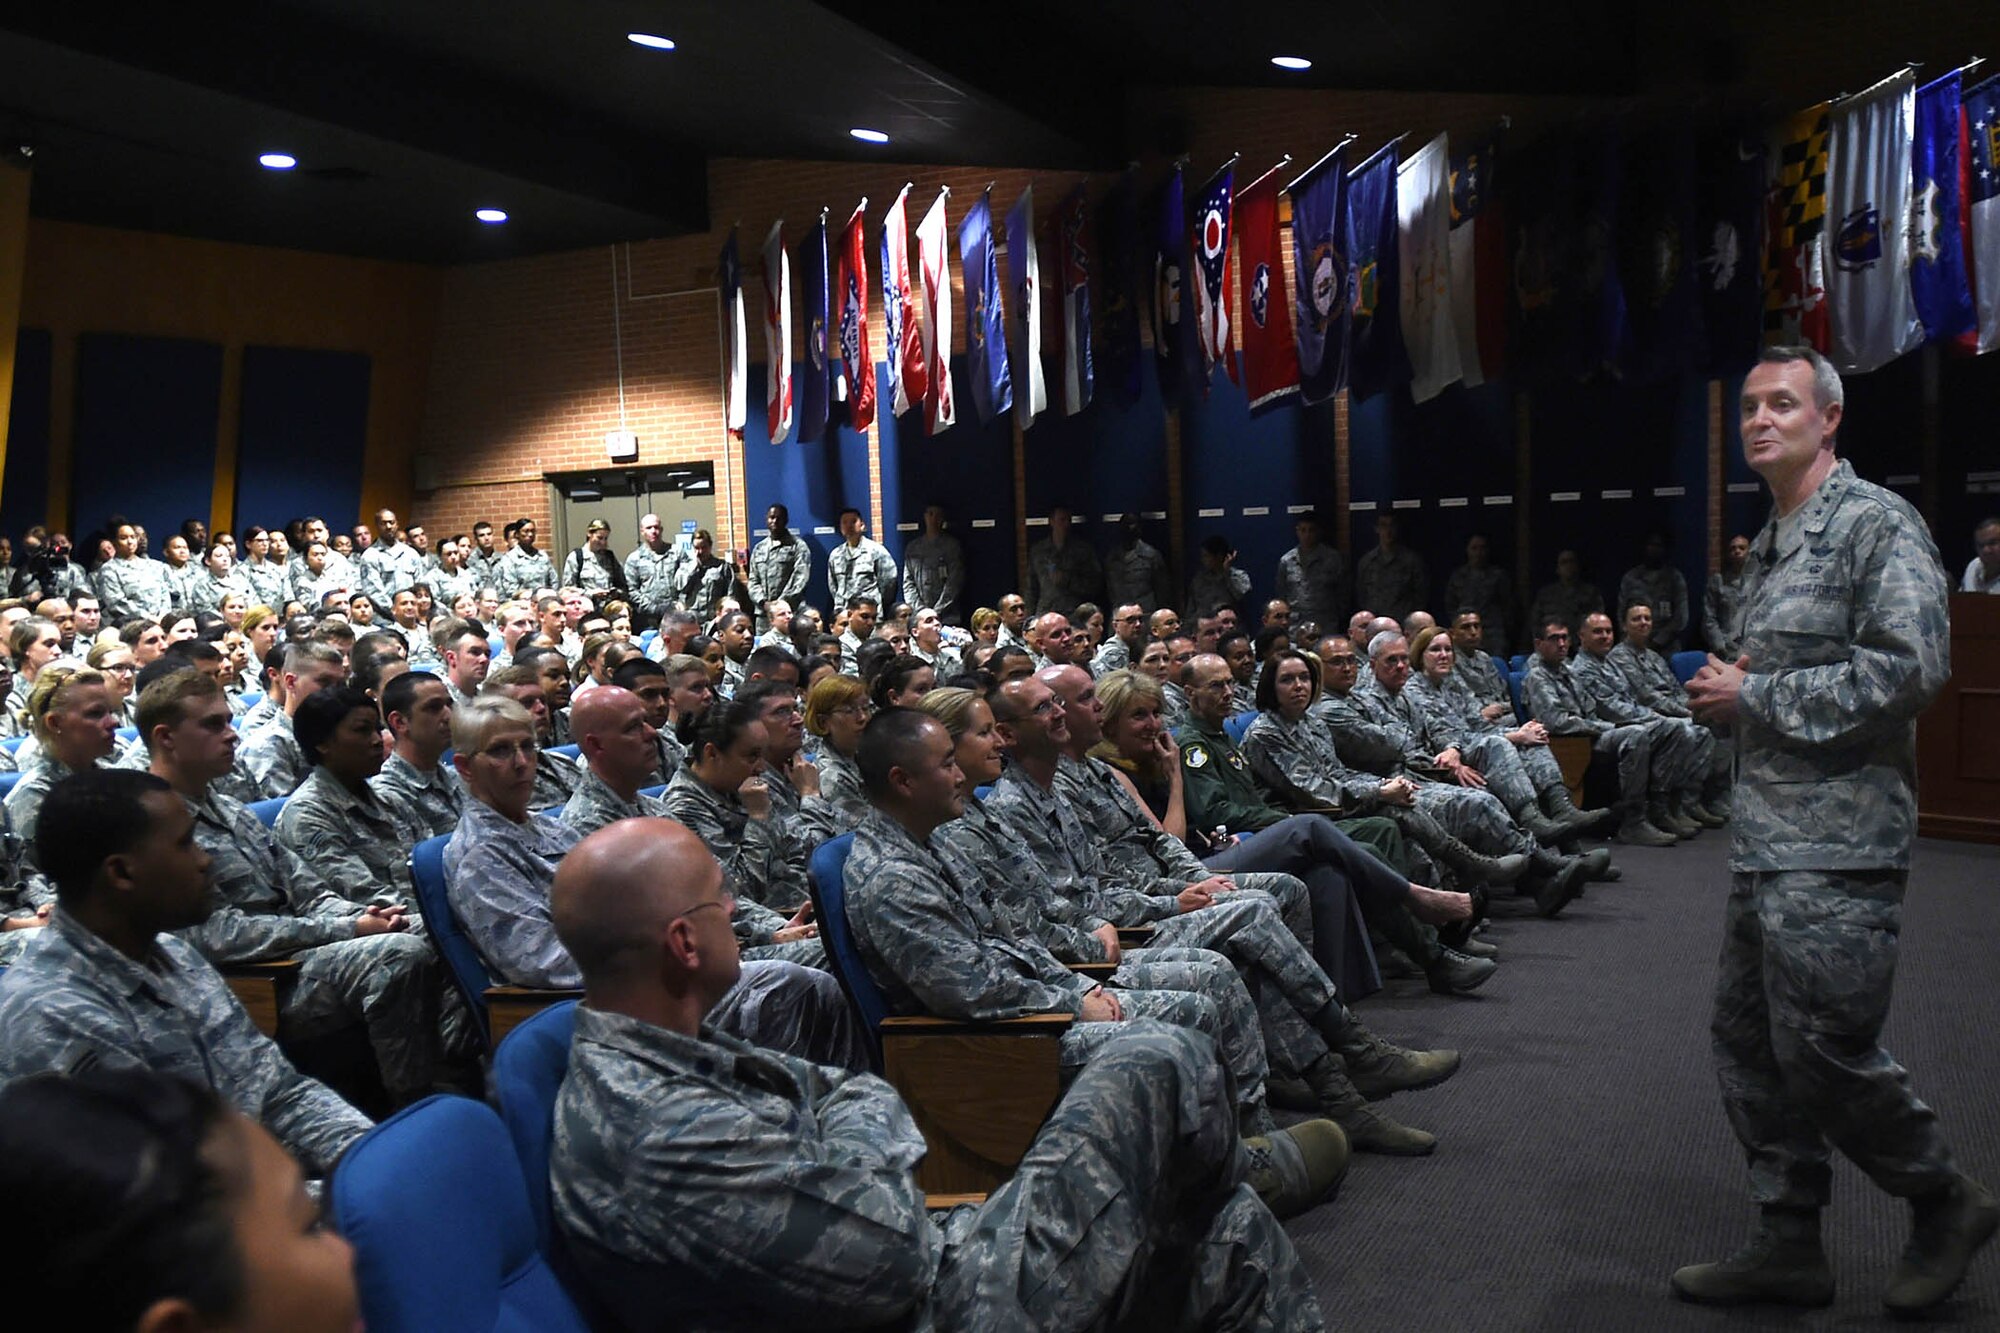 Lt. Gen. Darryl Roberson, commander, Air Education and Training Command, talks with 59th Medical Wing Airmen during an all call gathering May 11 at the Wilford Hall Ambulatory Surgical Center, Joint Base San Antonio-Lackland. The general talked about his focus areas and shared his leadership philosophy with the wing. (U.S. Air Force photo/Staff Sgt. Jason Huddleston)